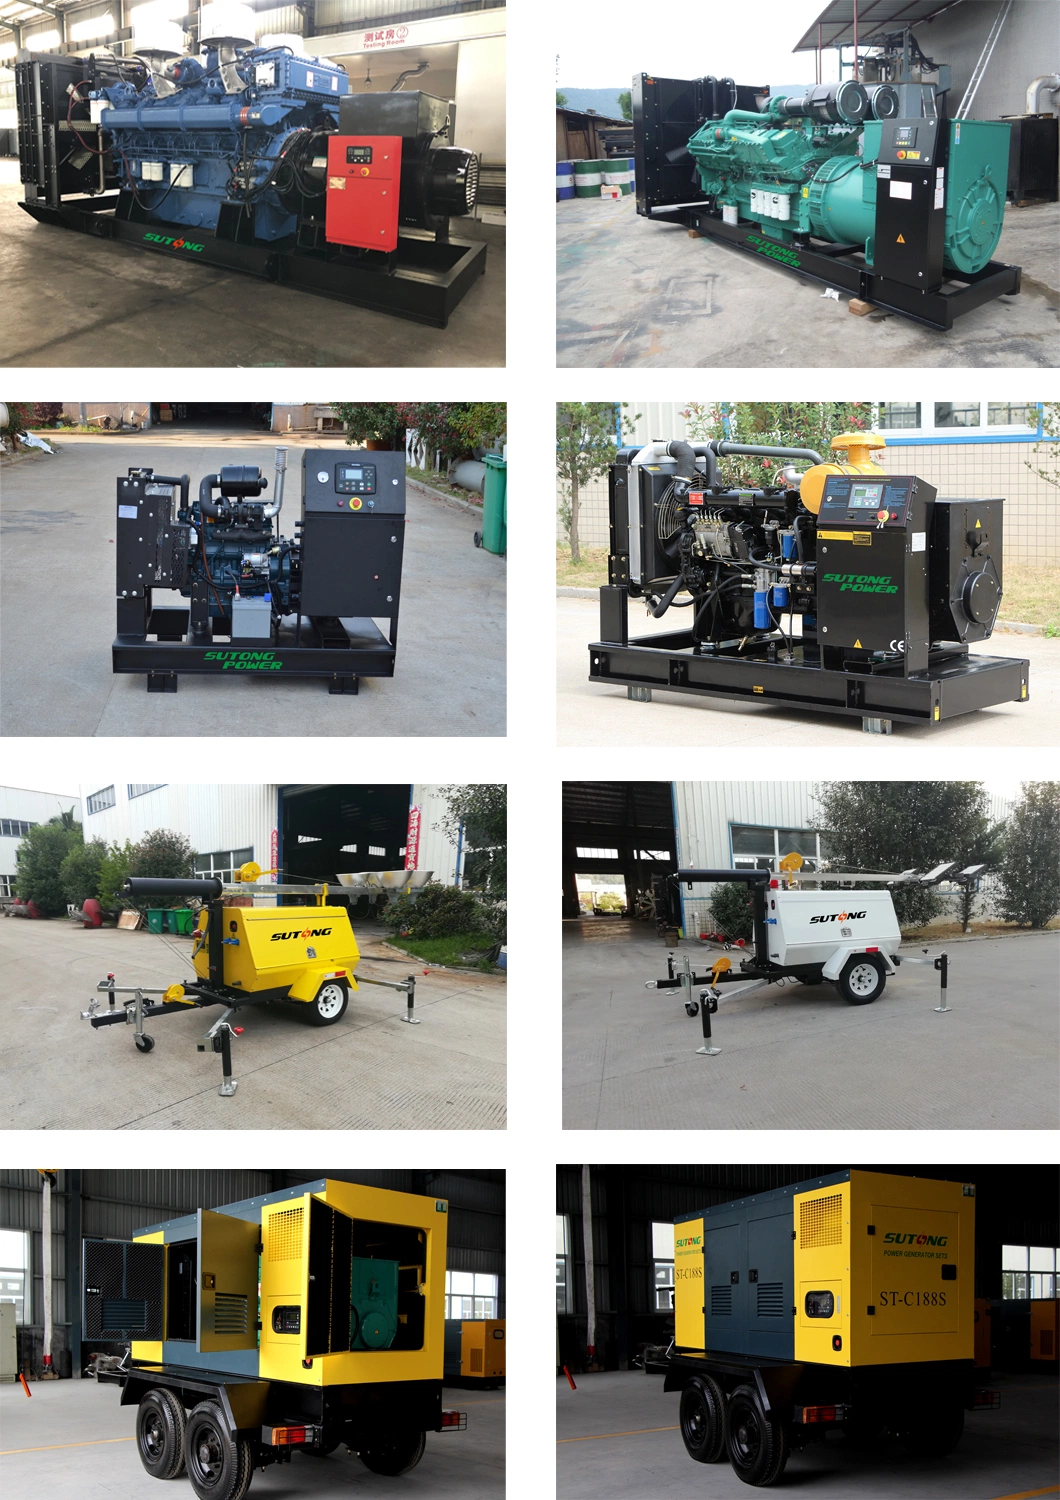 9.0HP/3600rmp Air Cooled Movable/Portable Silent Diesel Generator with 5kVA Diesel Engine De186fae for Home Use